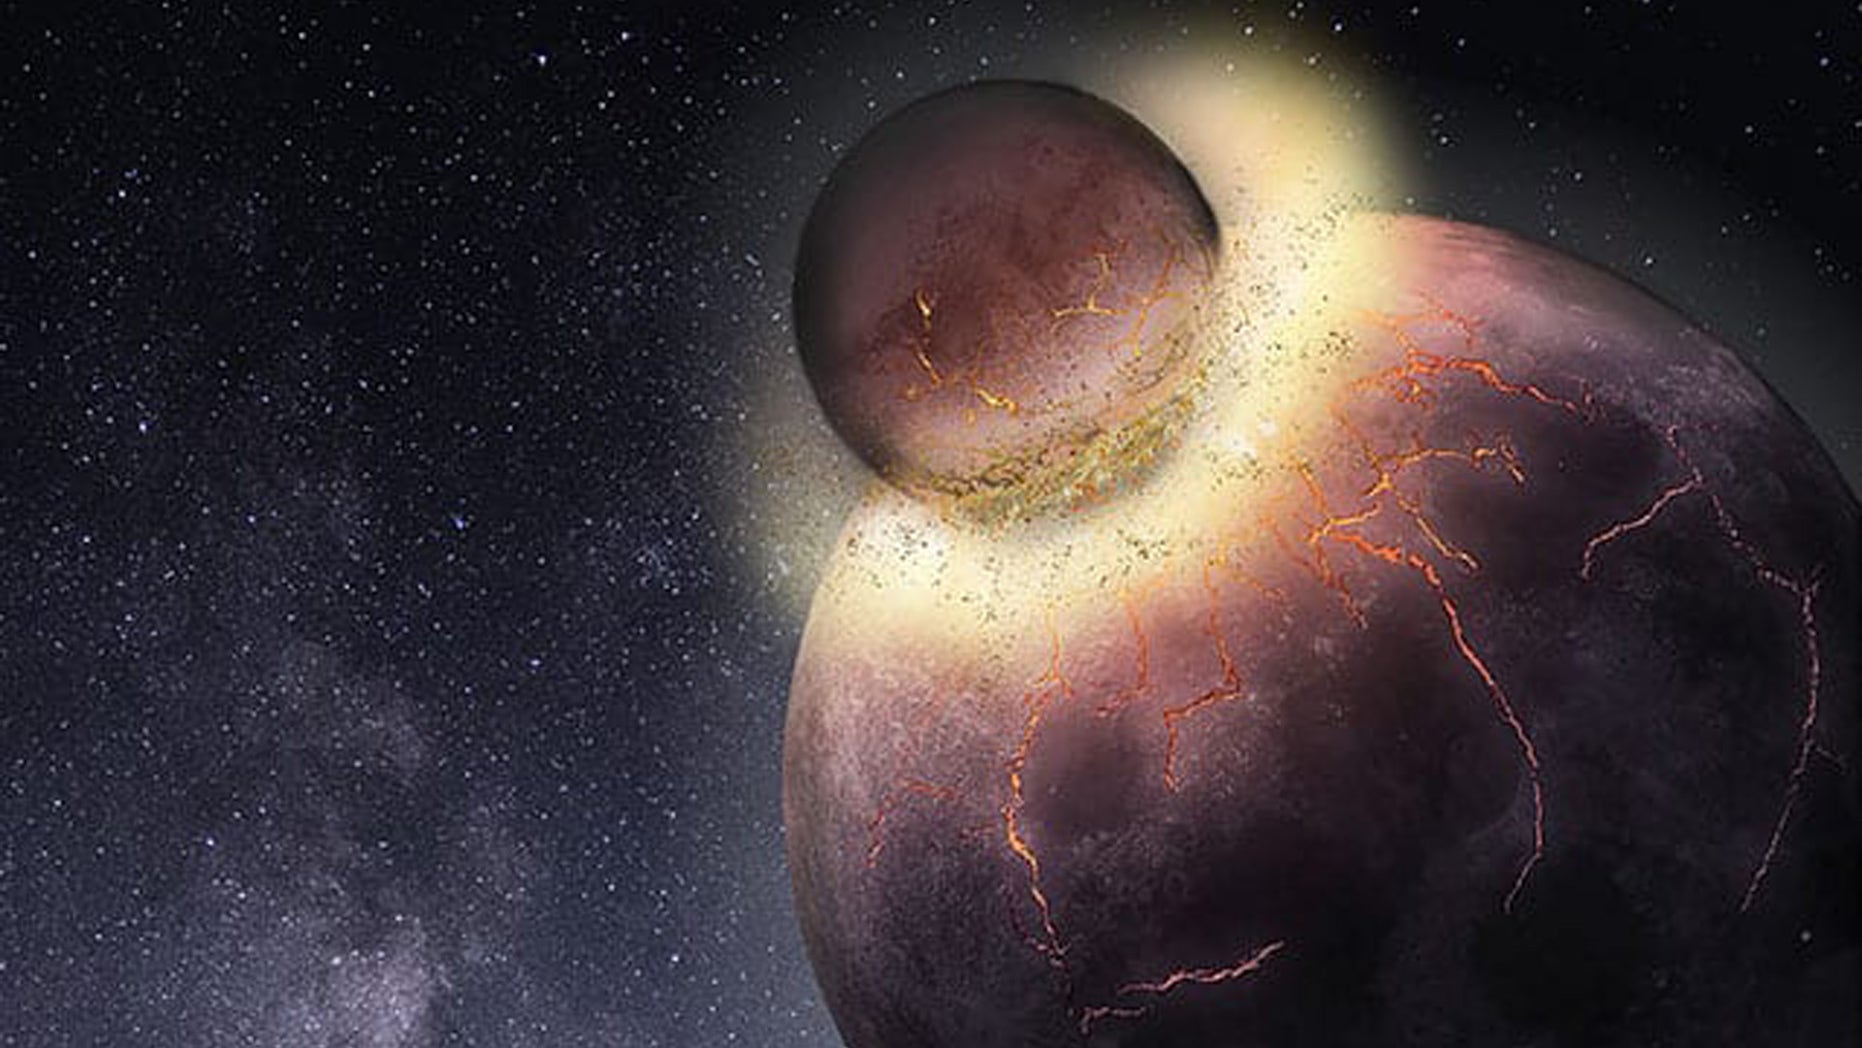 Life on Earth may have come from a collision with ancient planet more than 4 billion years ago